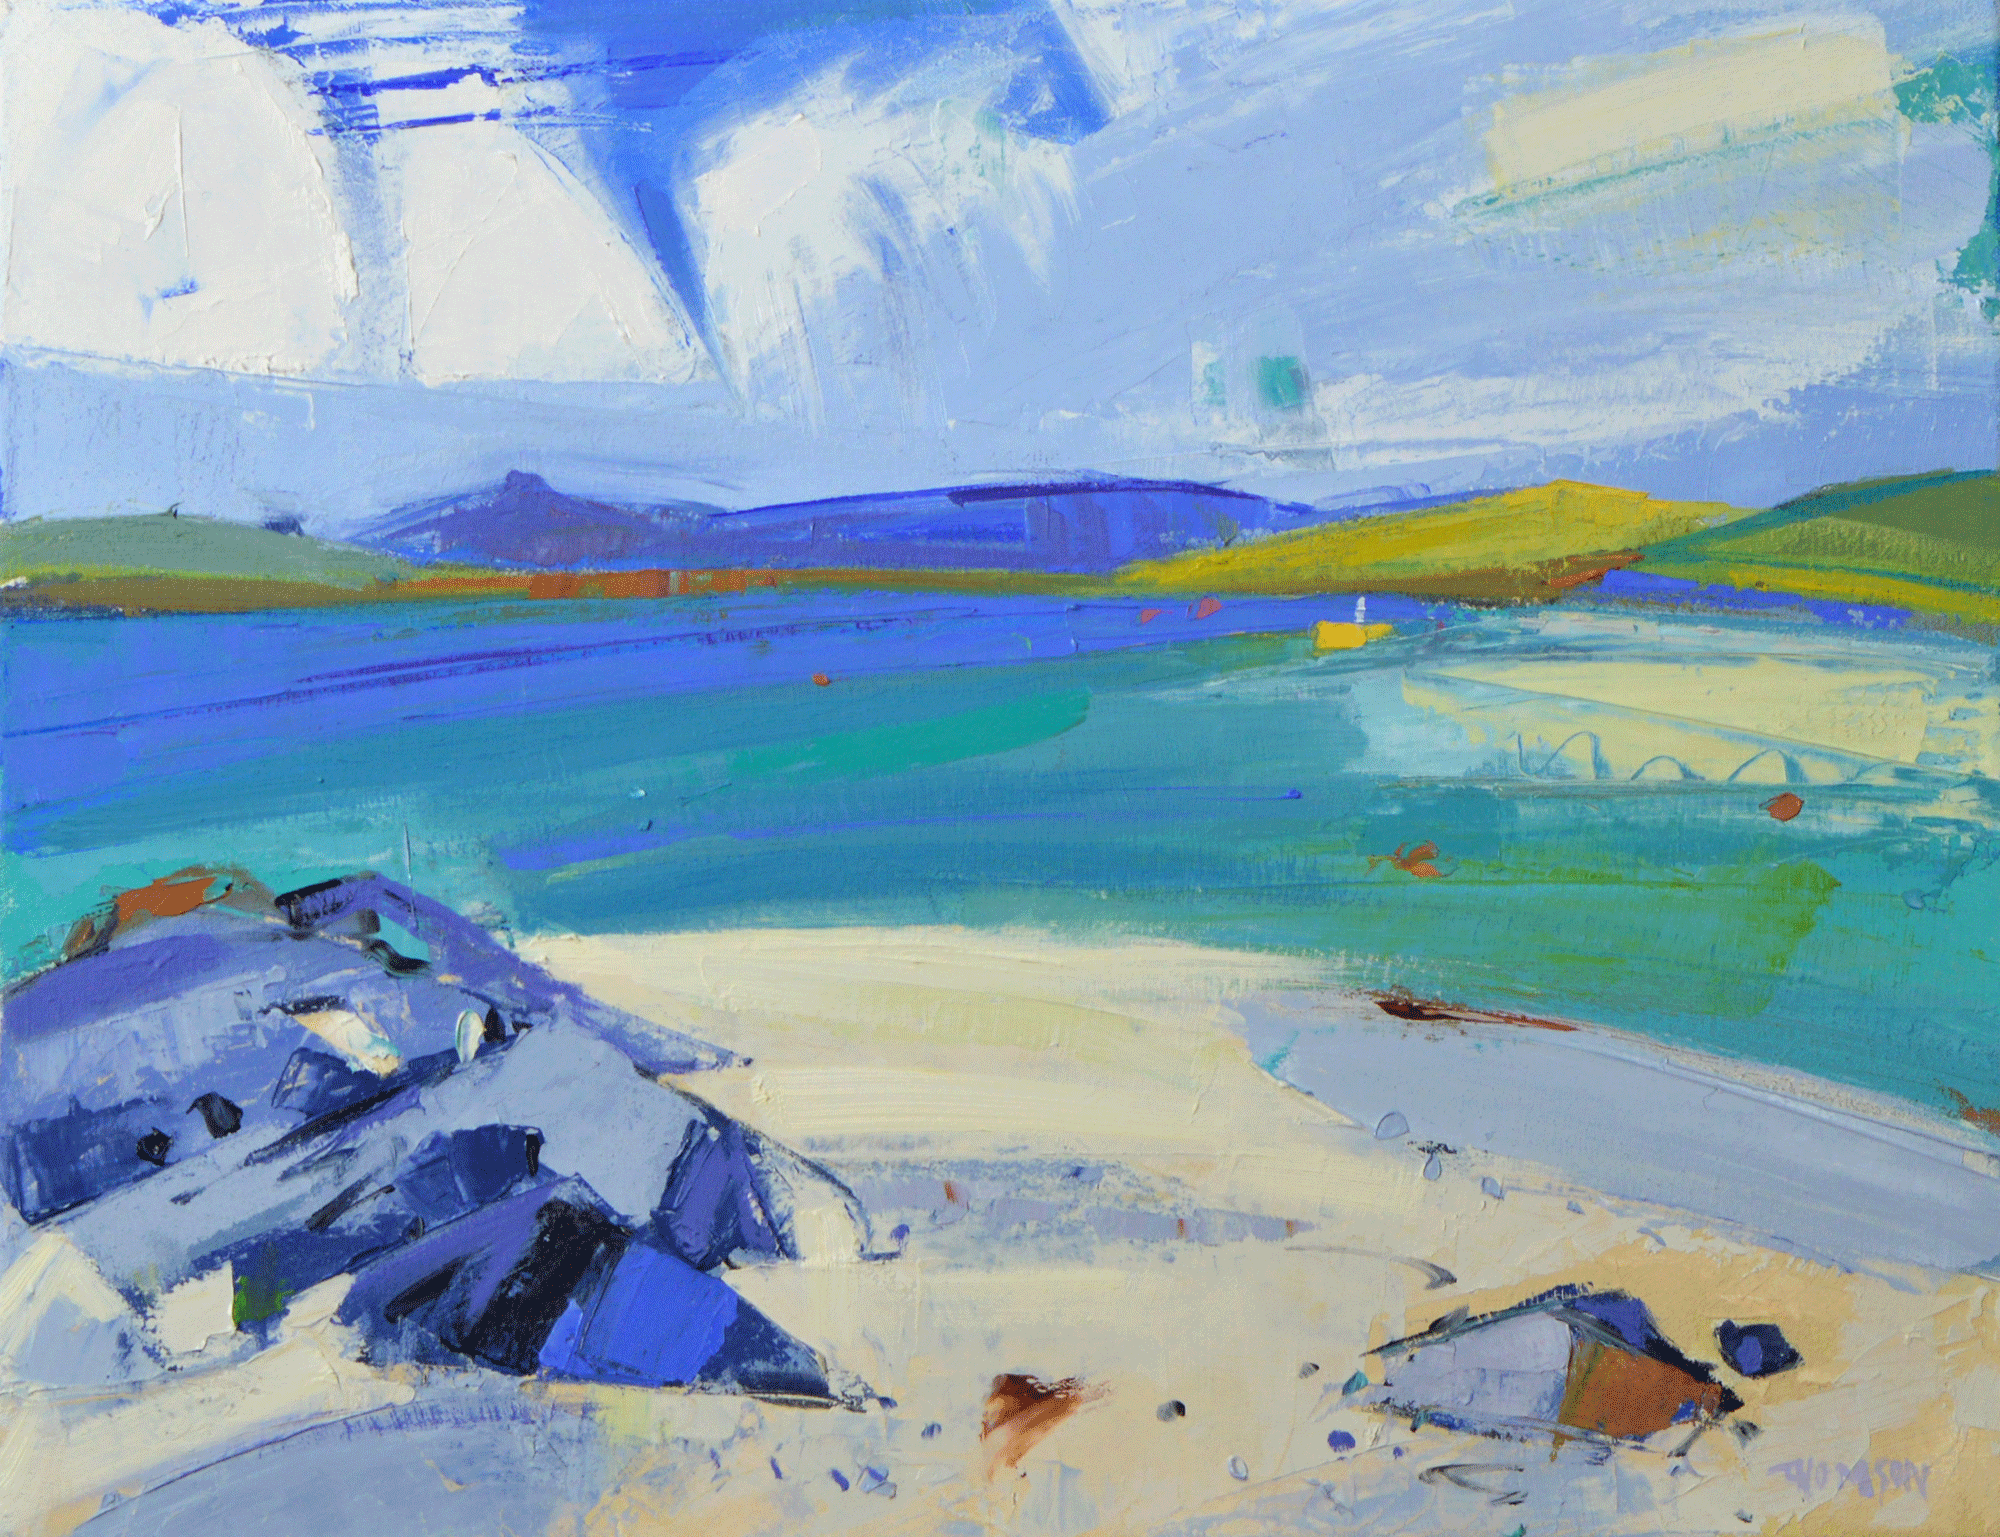 The Yellow Boat, Griminish, North Uist Marion Thomson